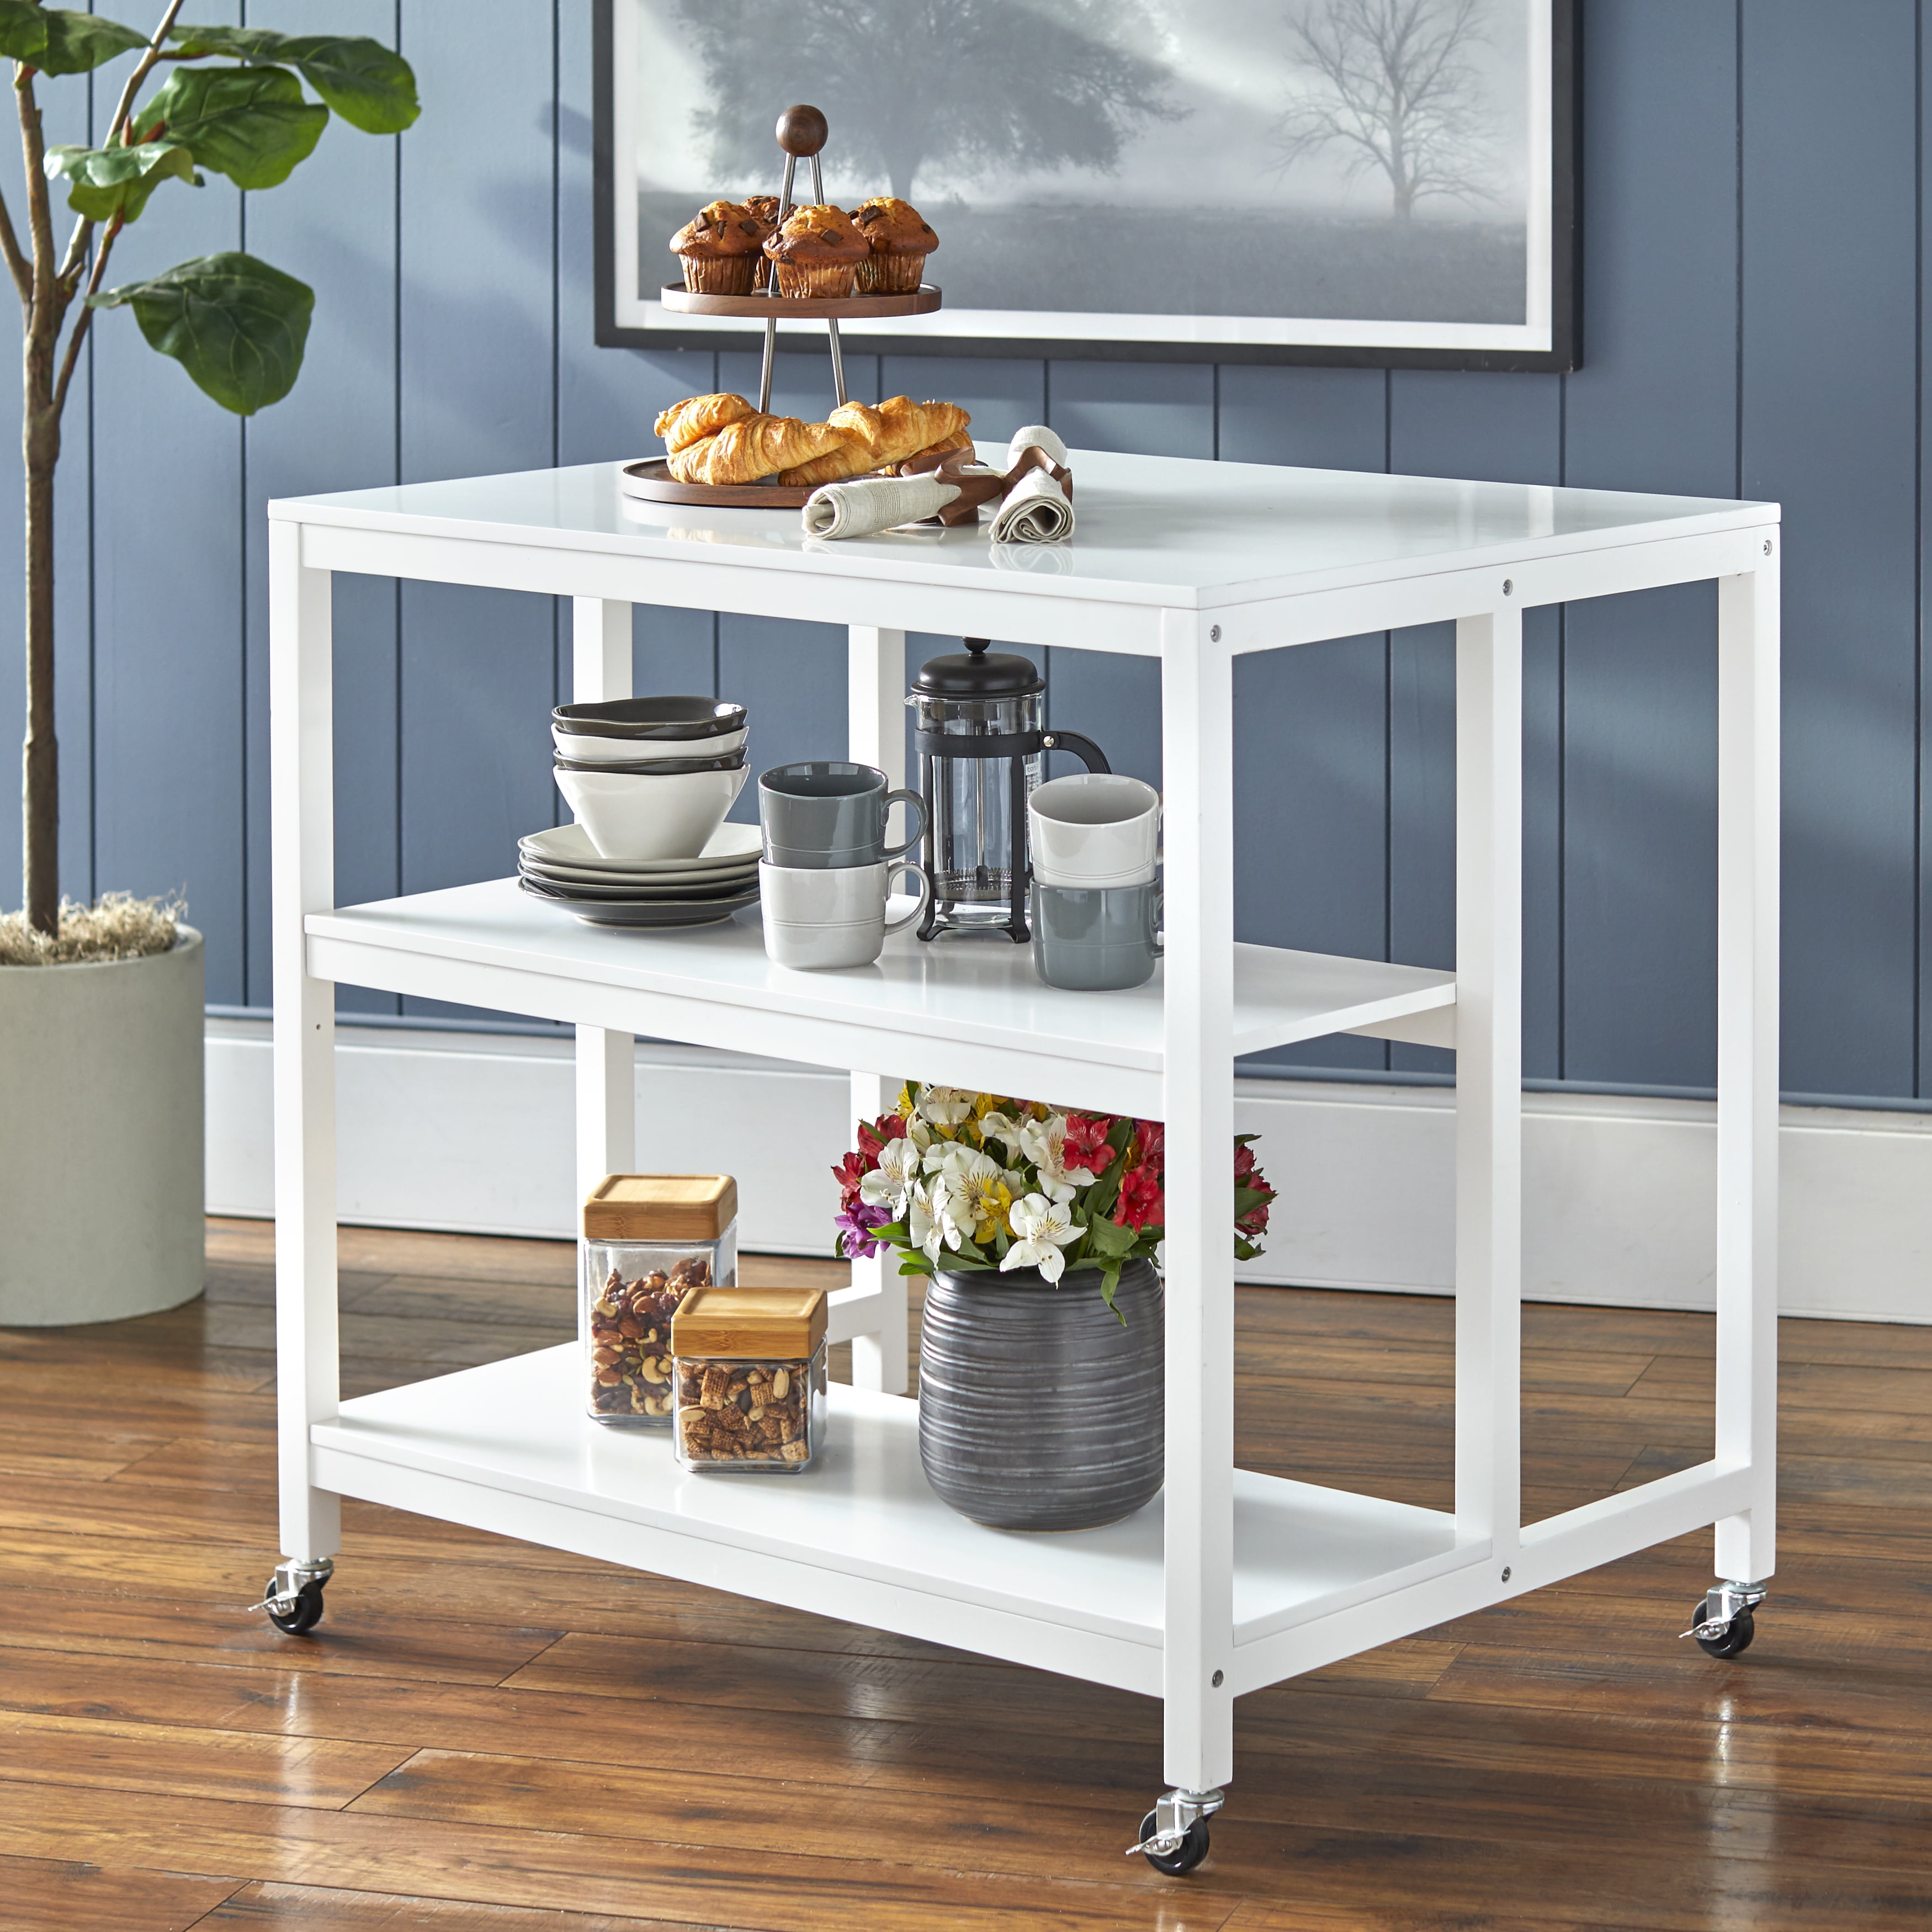 Mainstays Industrial Kitchen Island Cart with Shelves, White Finish